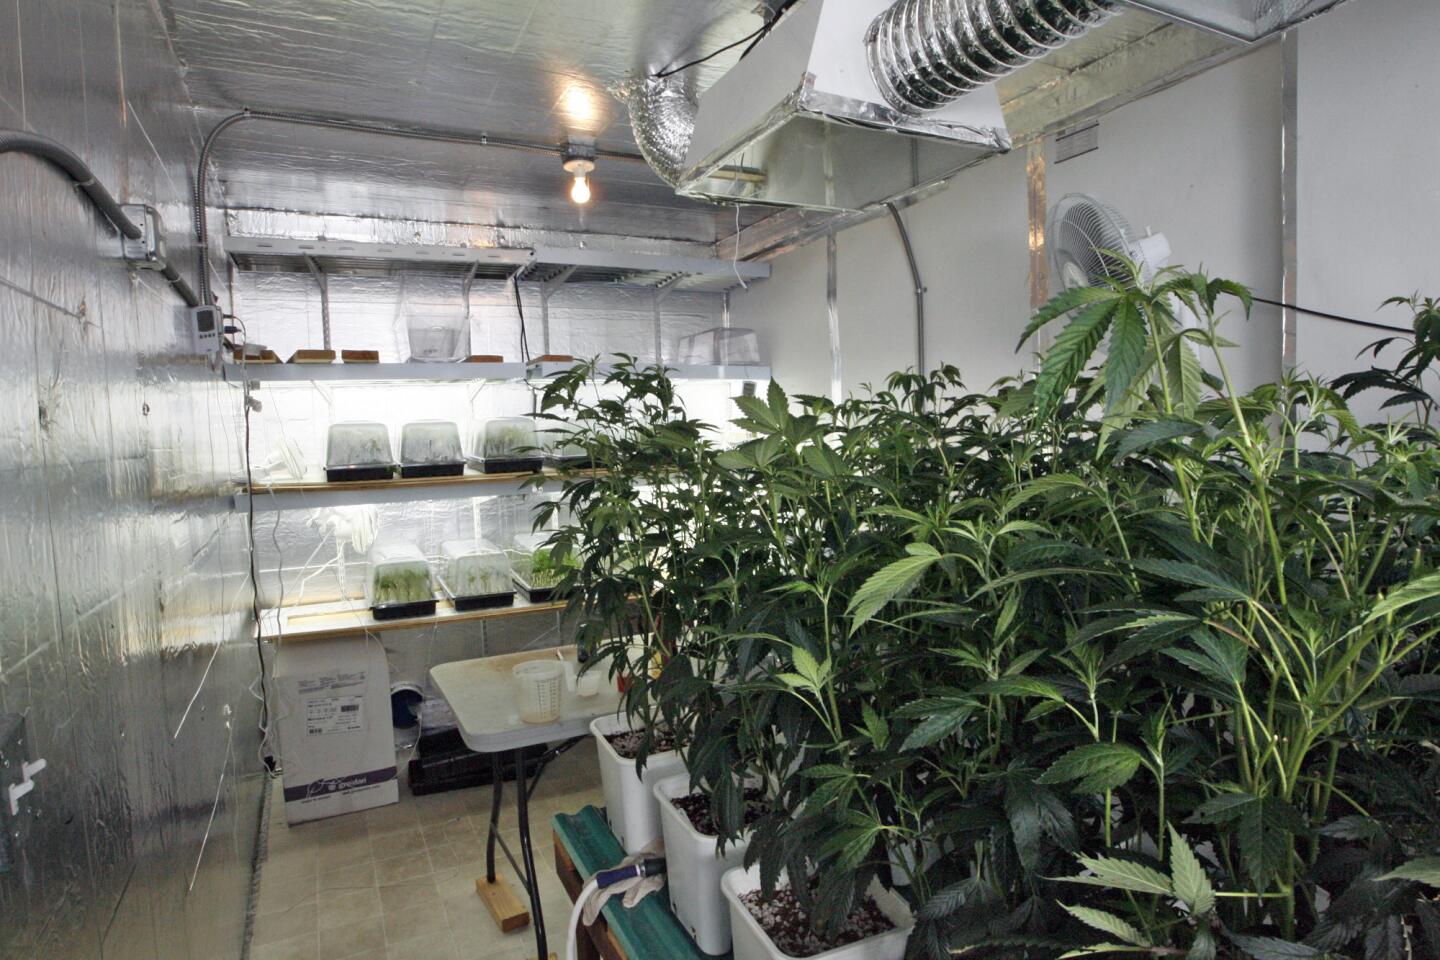 Photo Gallery: Pot growing operation busted